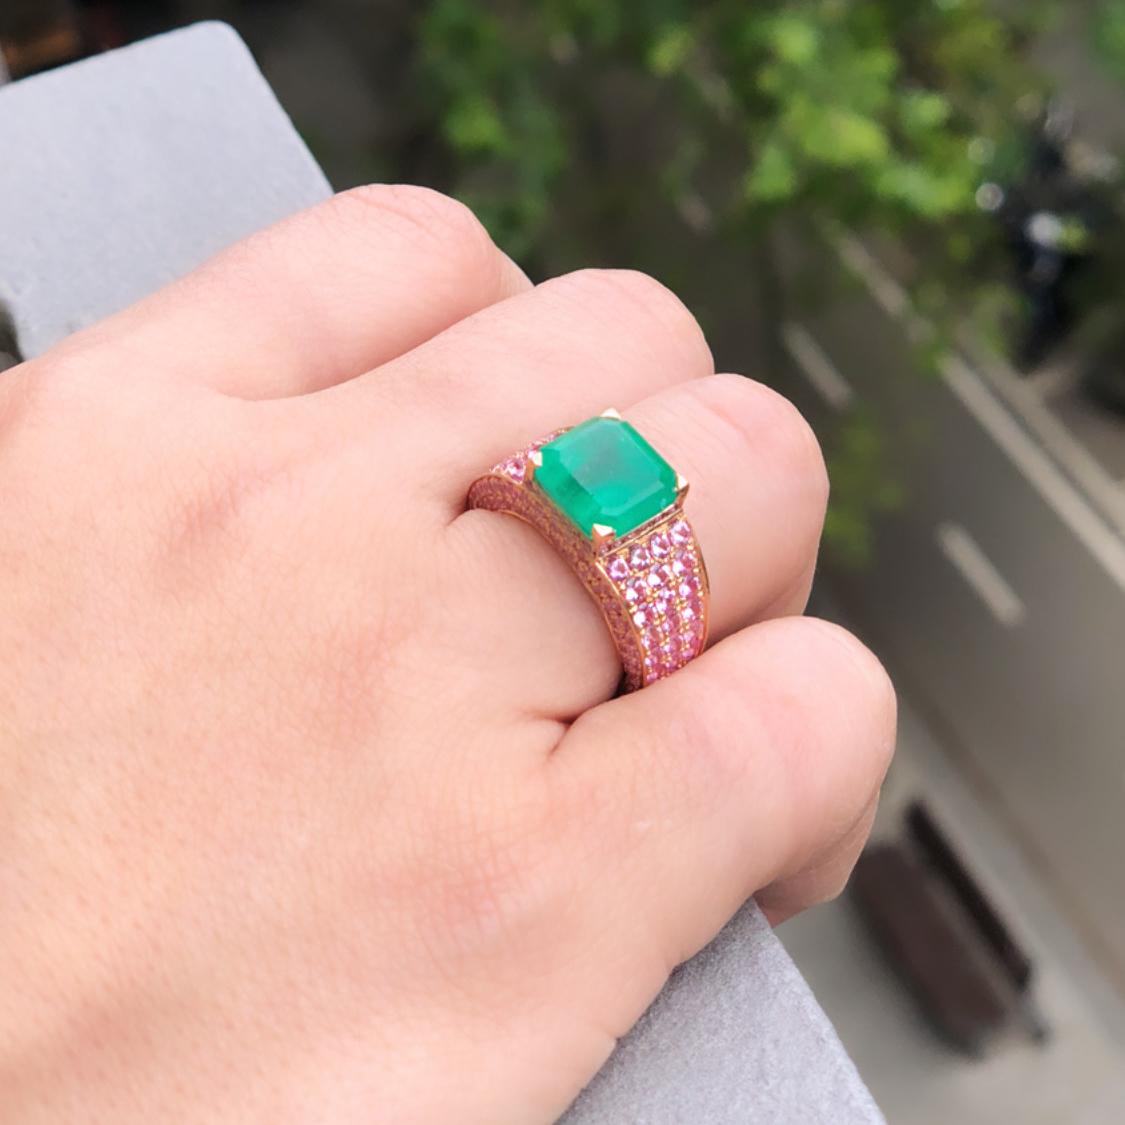 Statement 18kt rose gold ring with a stunning 4.23ct Colombian emerald and 2.35cts of pink sapphires set throughout, from Ralph Masri's Modernist collection inspired by mid-century Modernist architecture with an emphasis on minimalist shapes and